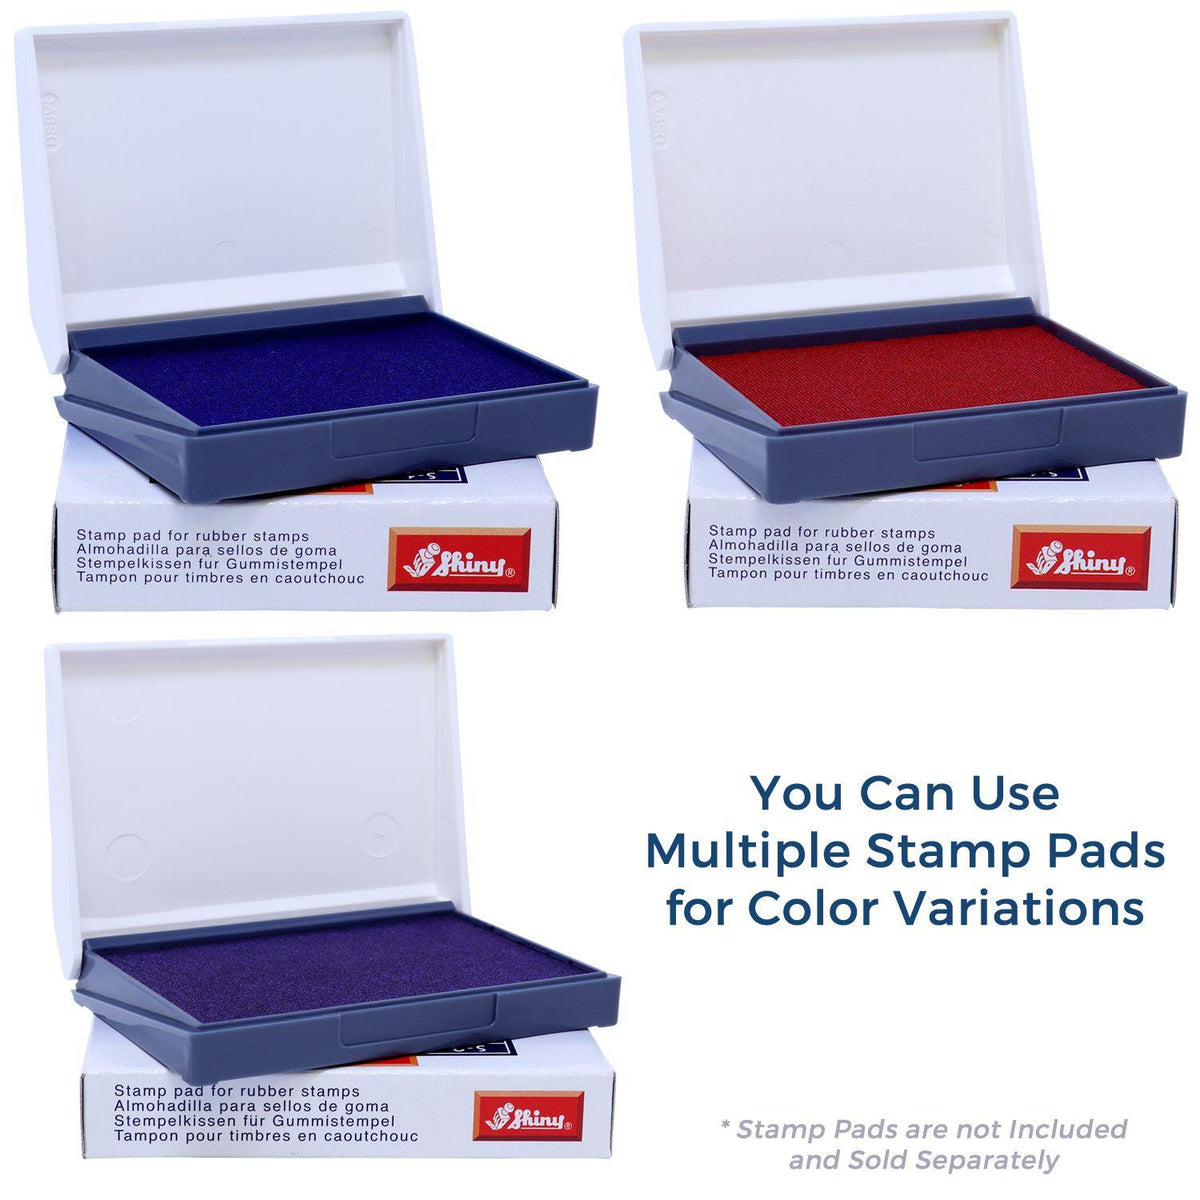 Stamp Pads for Copia Rubber Stamp Available